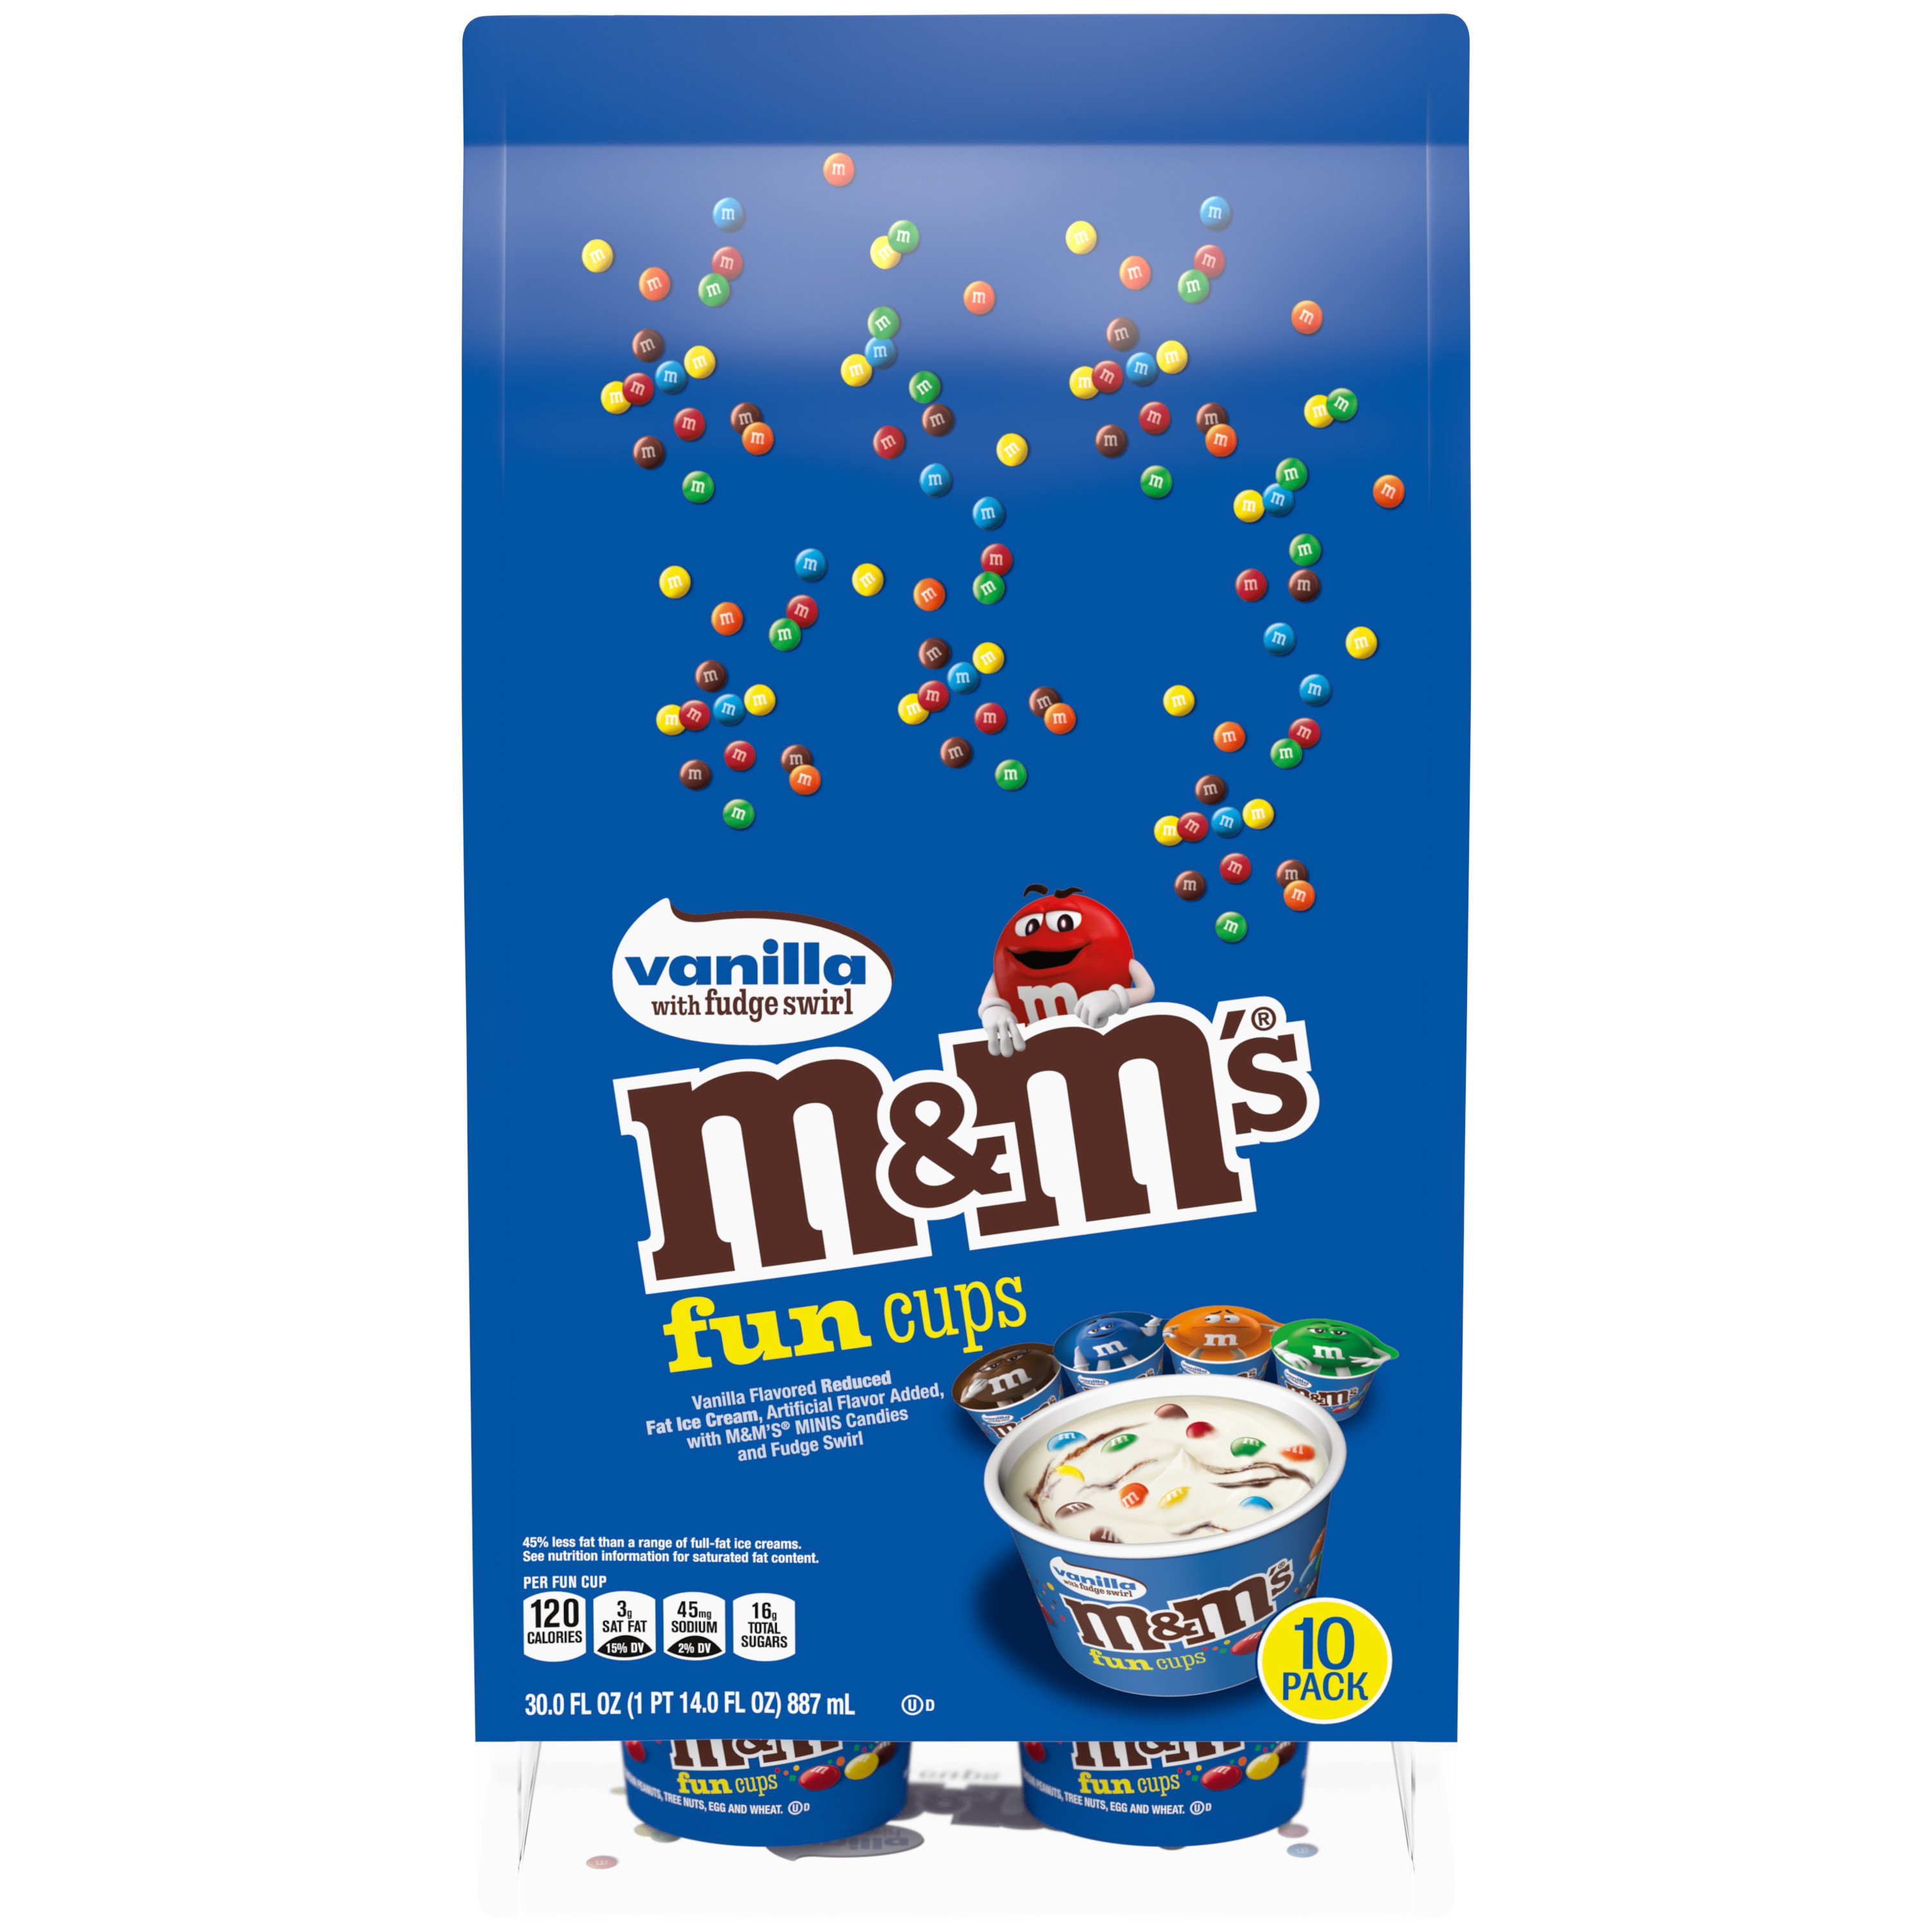 M&M's Ice Cream Fun Cups Are Here To Spread Holiday Cheer